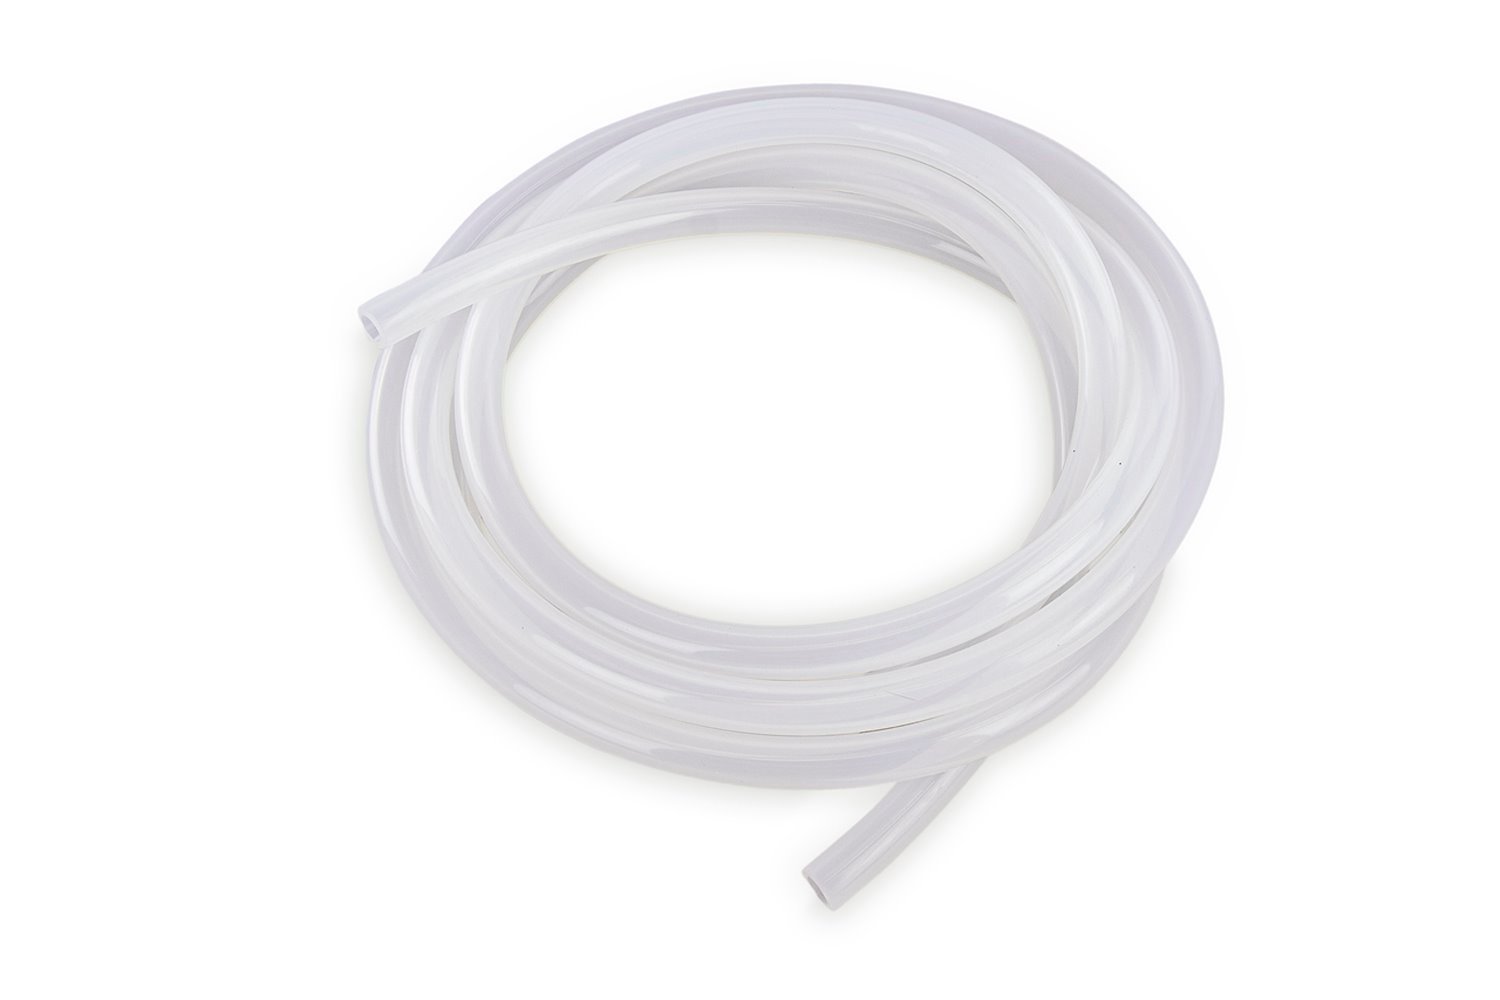 HTSVH3-CLEARx5 High-Temperature Silicone Vacuum Hose Tubing, 1/8 in. ID, 5 ft. Roll, Clear